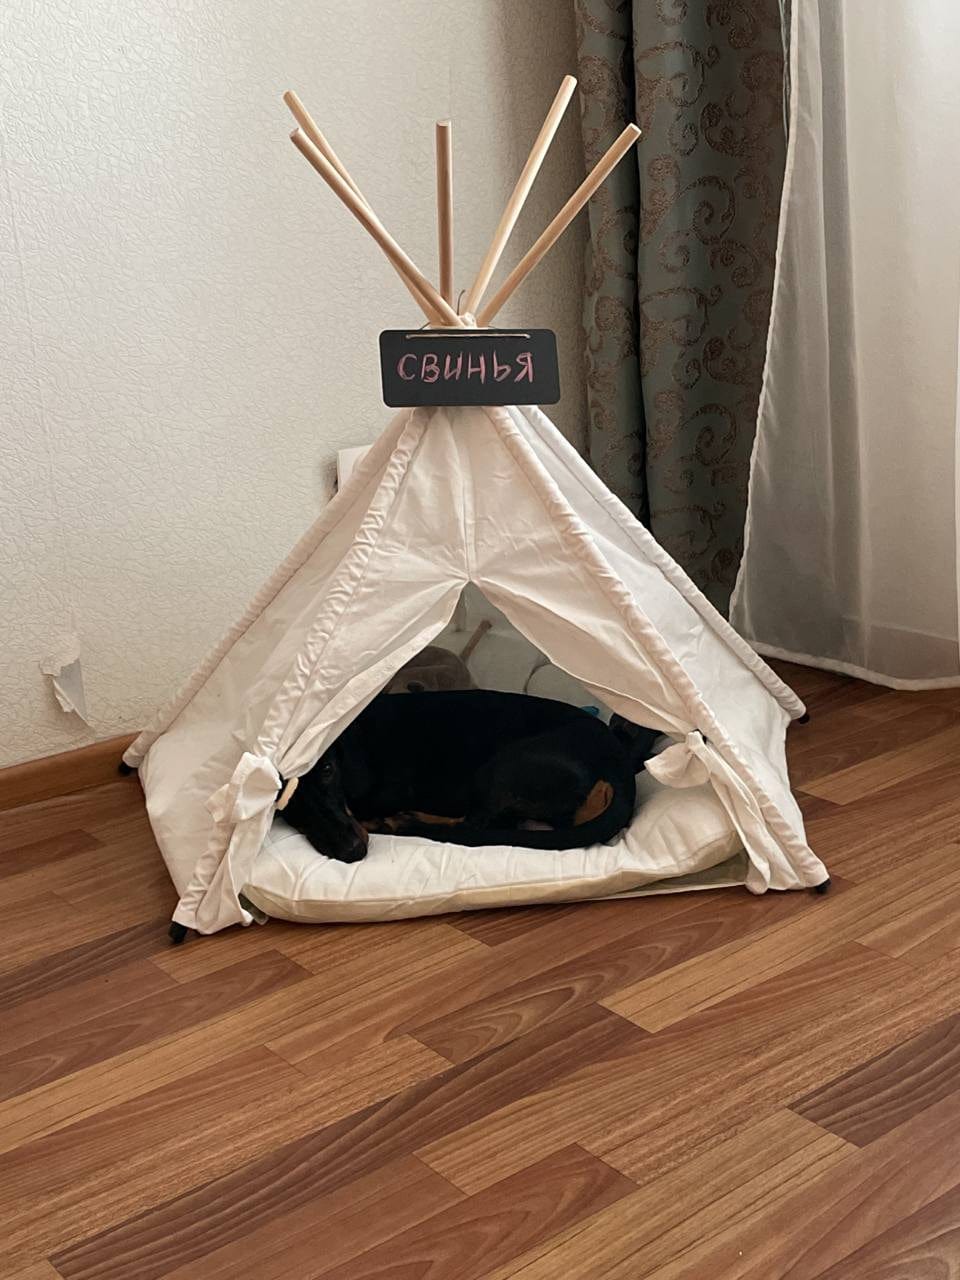 Dachshund Teepee Bed The Doxie World